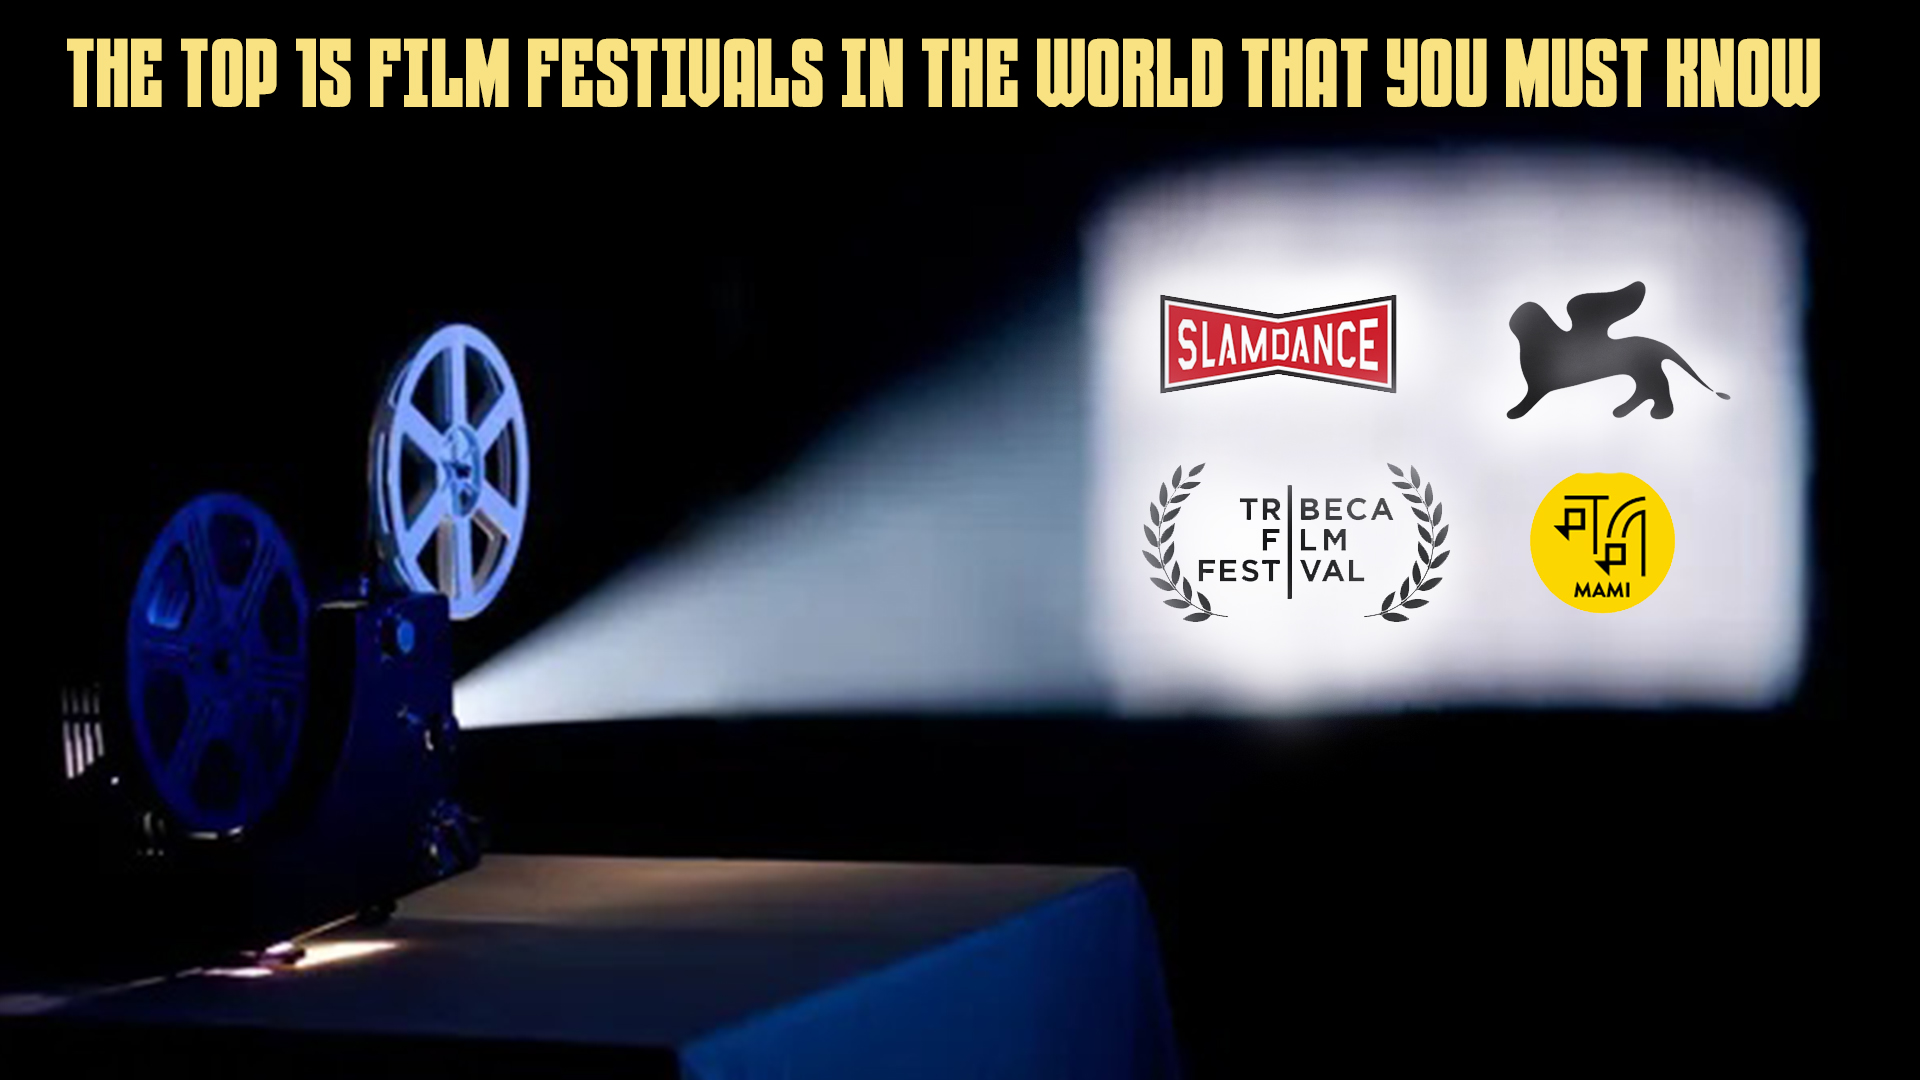 THE TOP 15 FILM FESTIVALS IN THE WORLD THAT YOU MUST KNOW